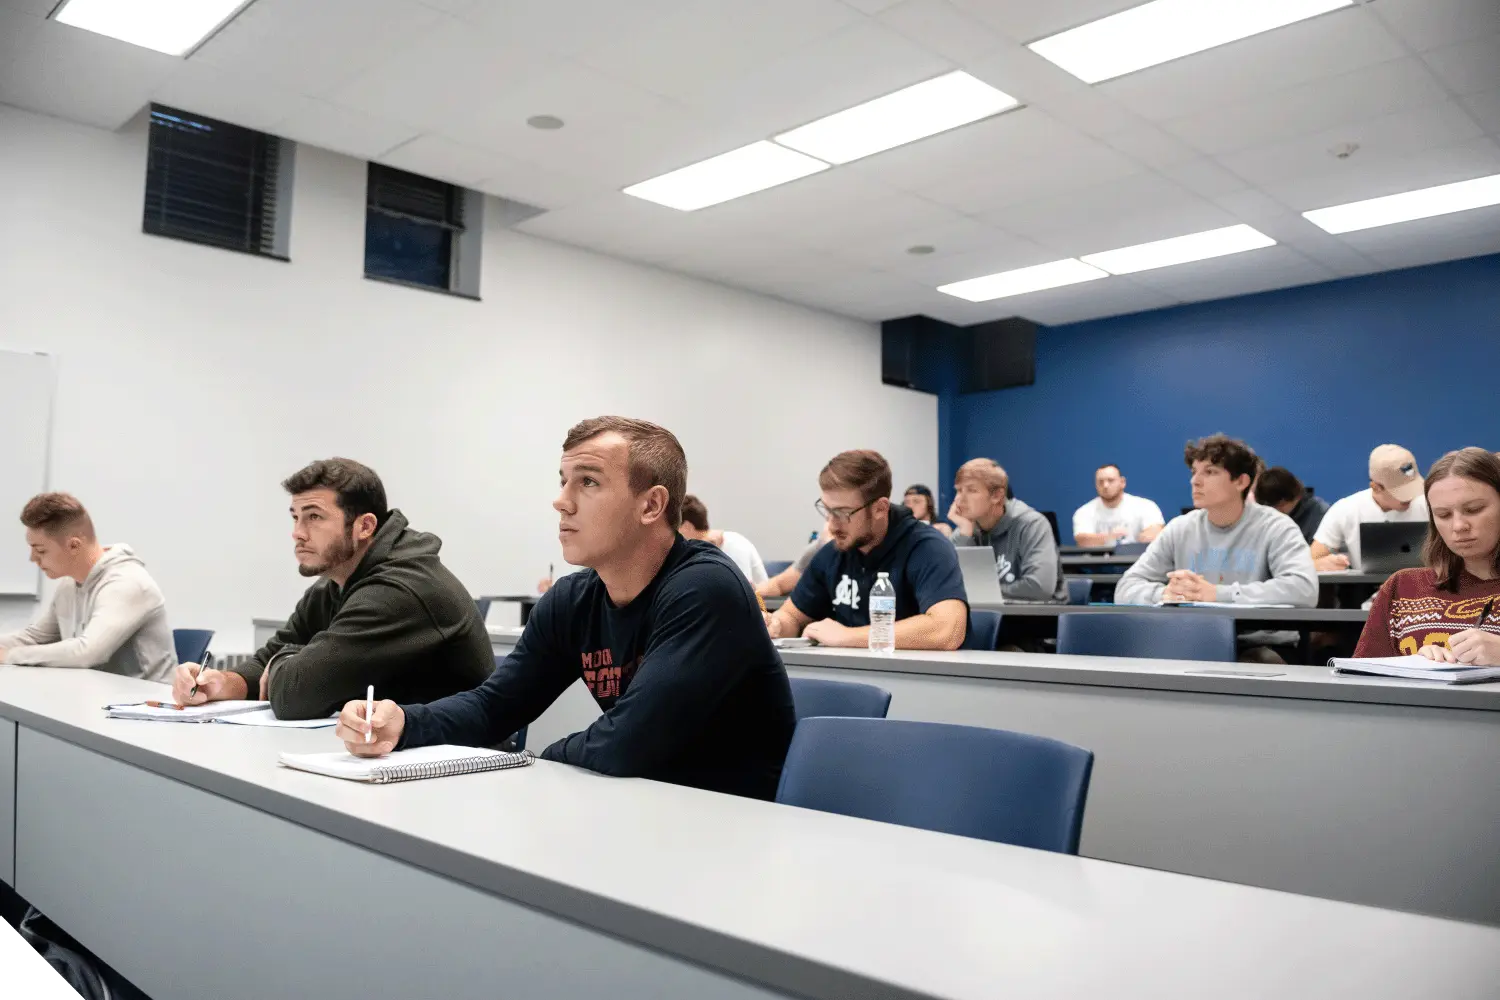 Marietta College Students sitting in a classroom and taking notes while listening to a lecture.